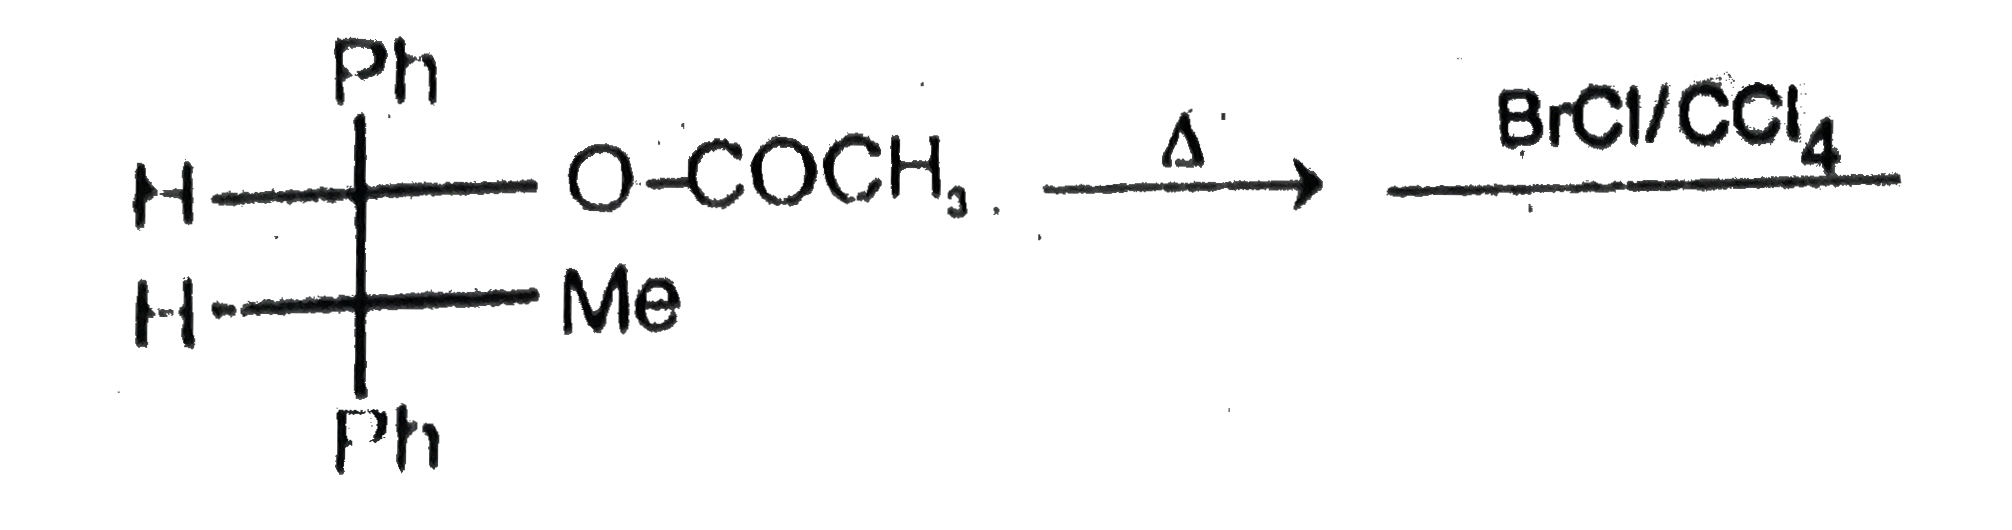 The final product of the following reaction is